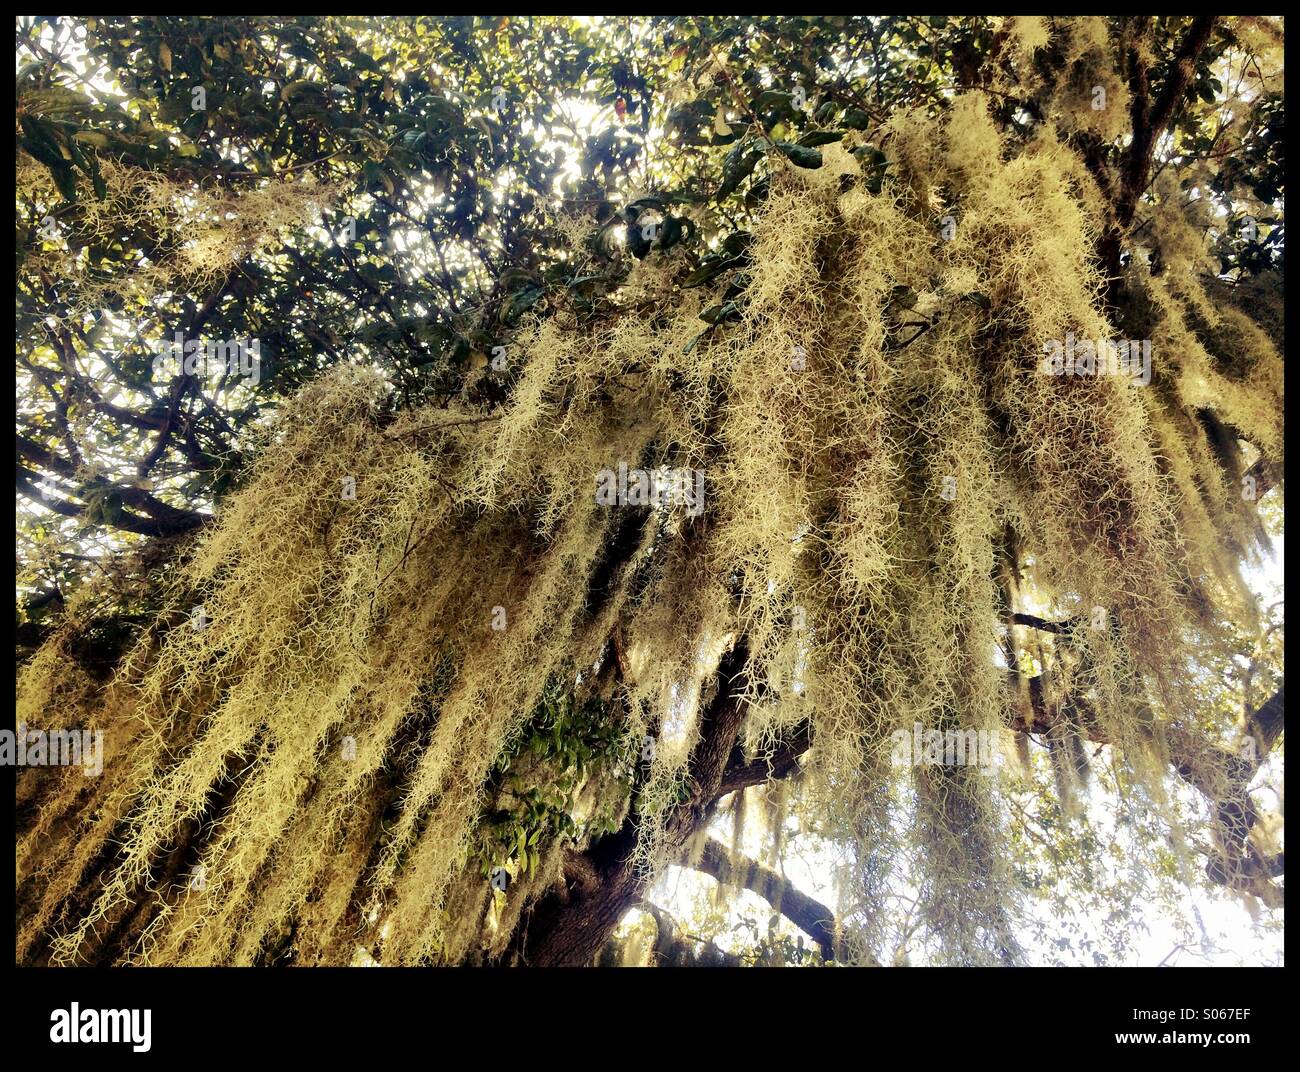 Spanish Moss Hanging From A Tree Stock Photo Alamy